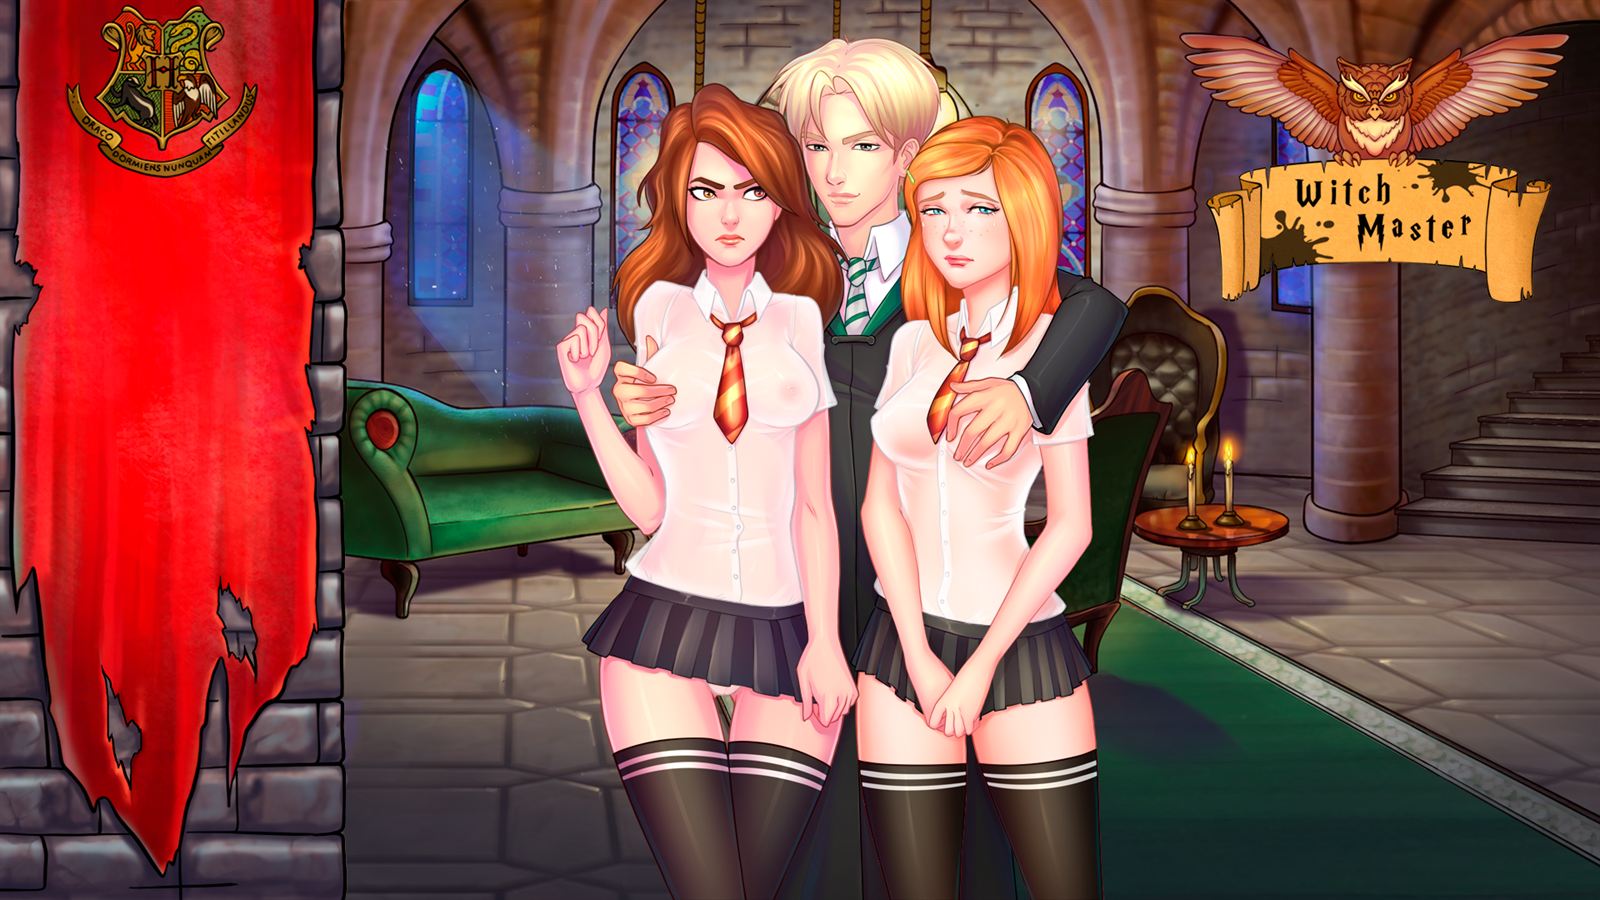 Witch Master Ren'Py Porn Sex Game v.0.1.9 Download for Windows, MacOS,  Android